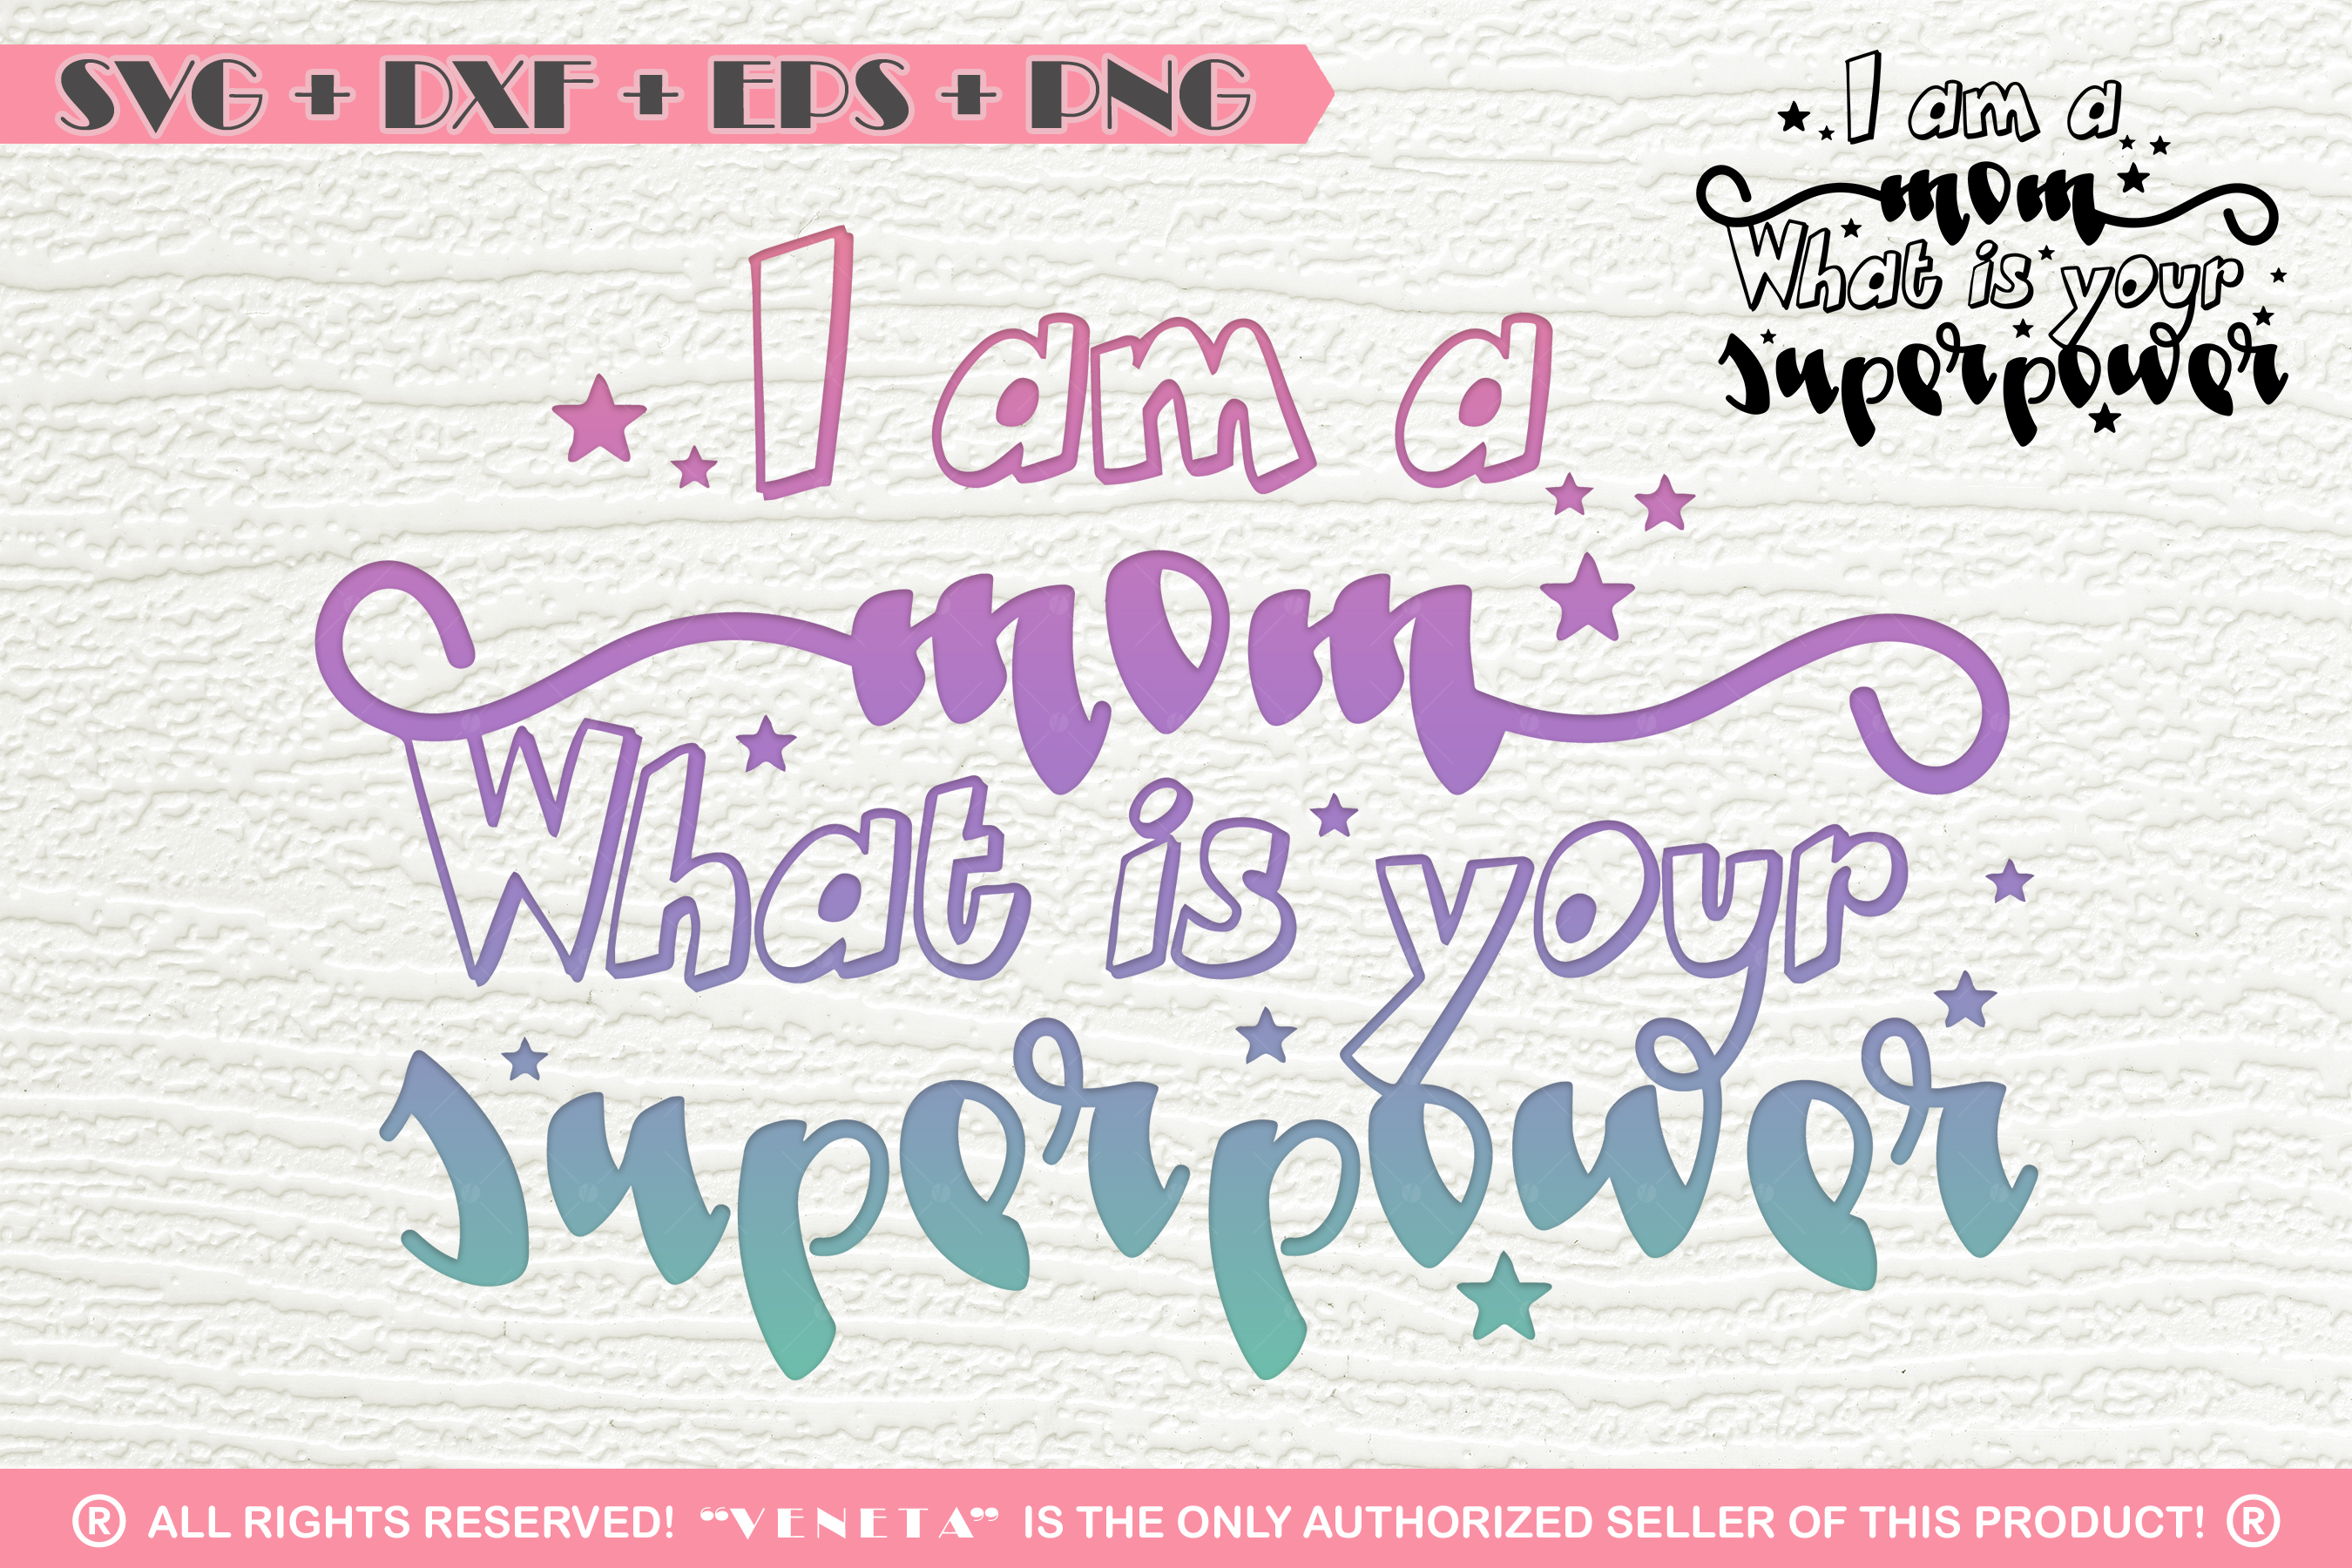 Mom Superpower |Mother| Quotes| SVG DXF PNG EPS Cutting File